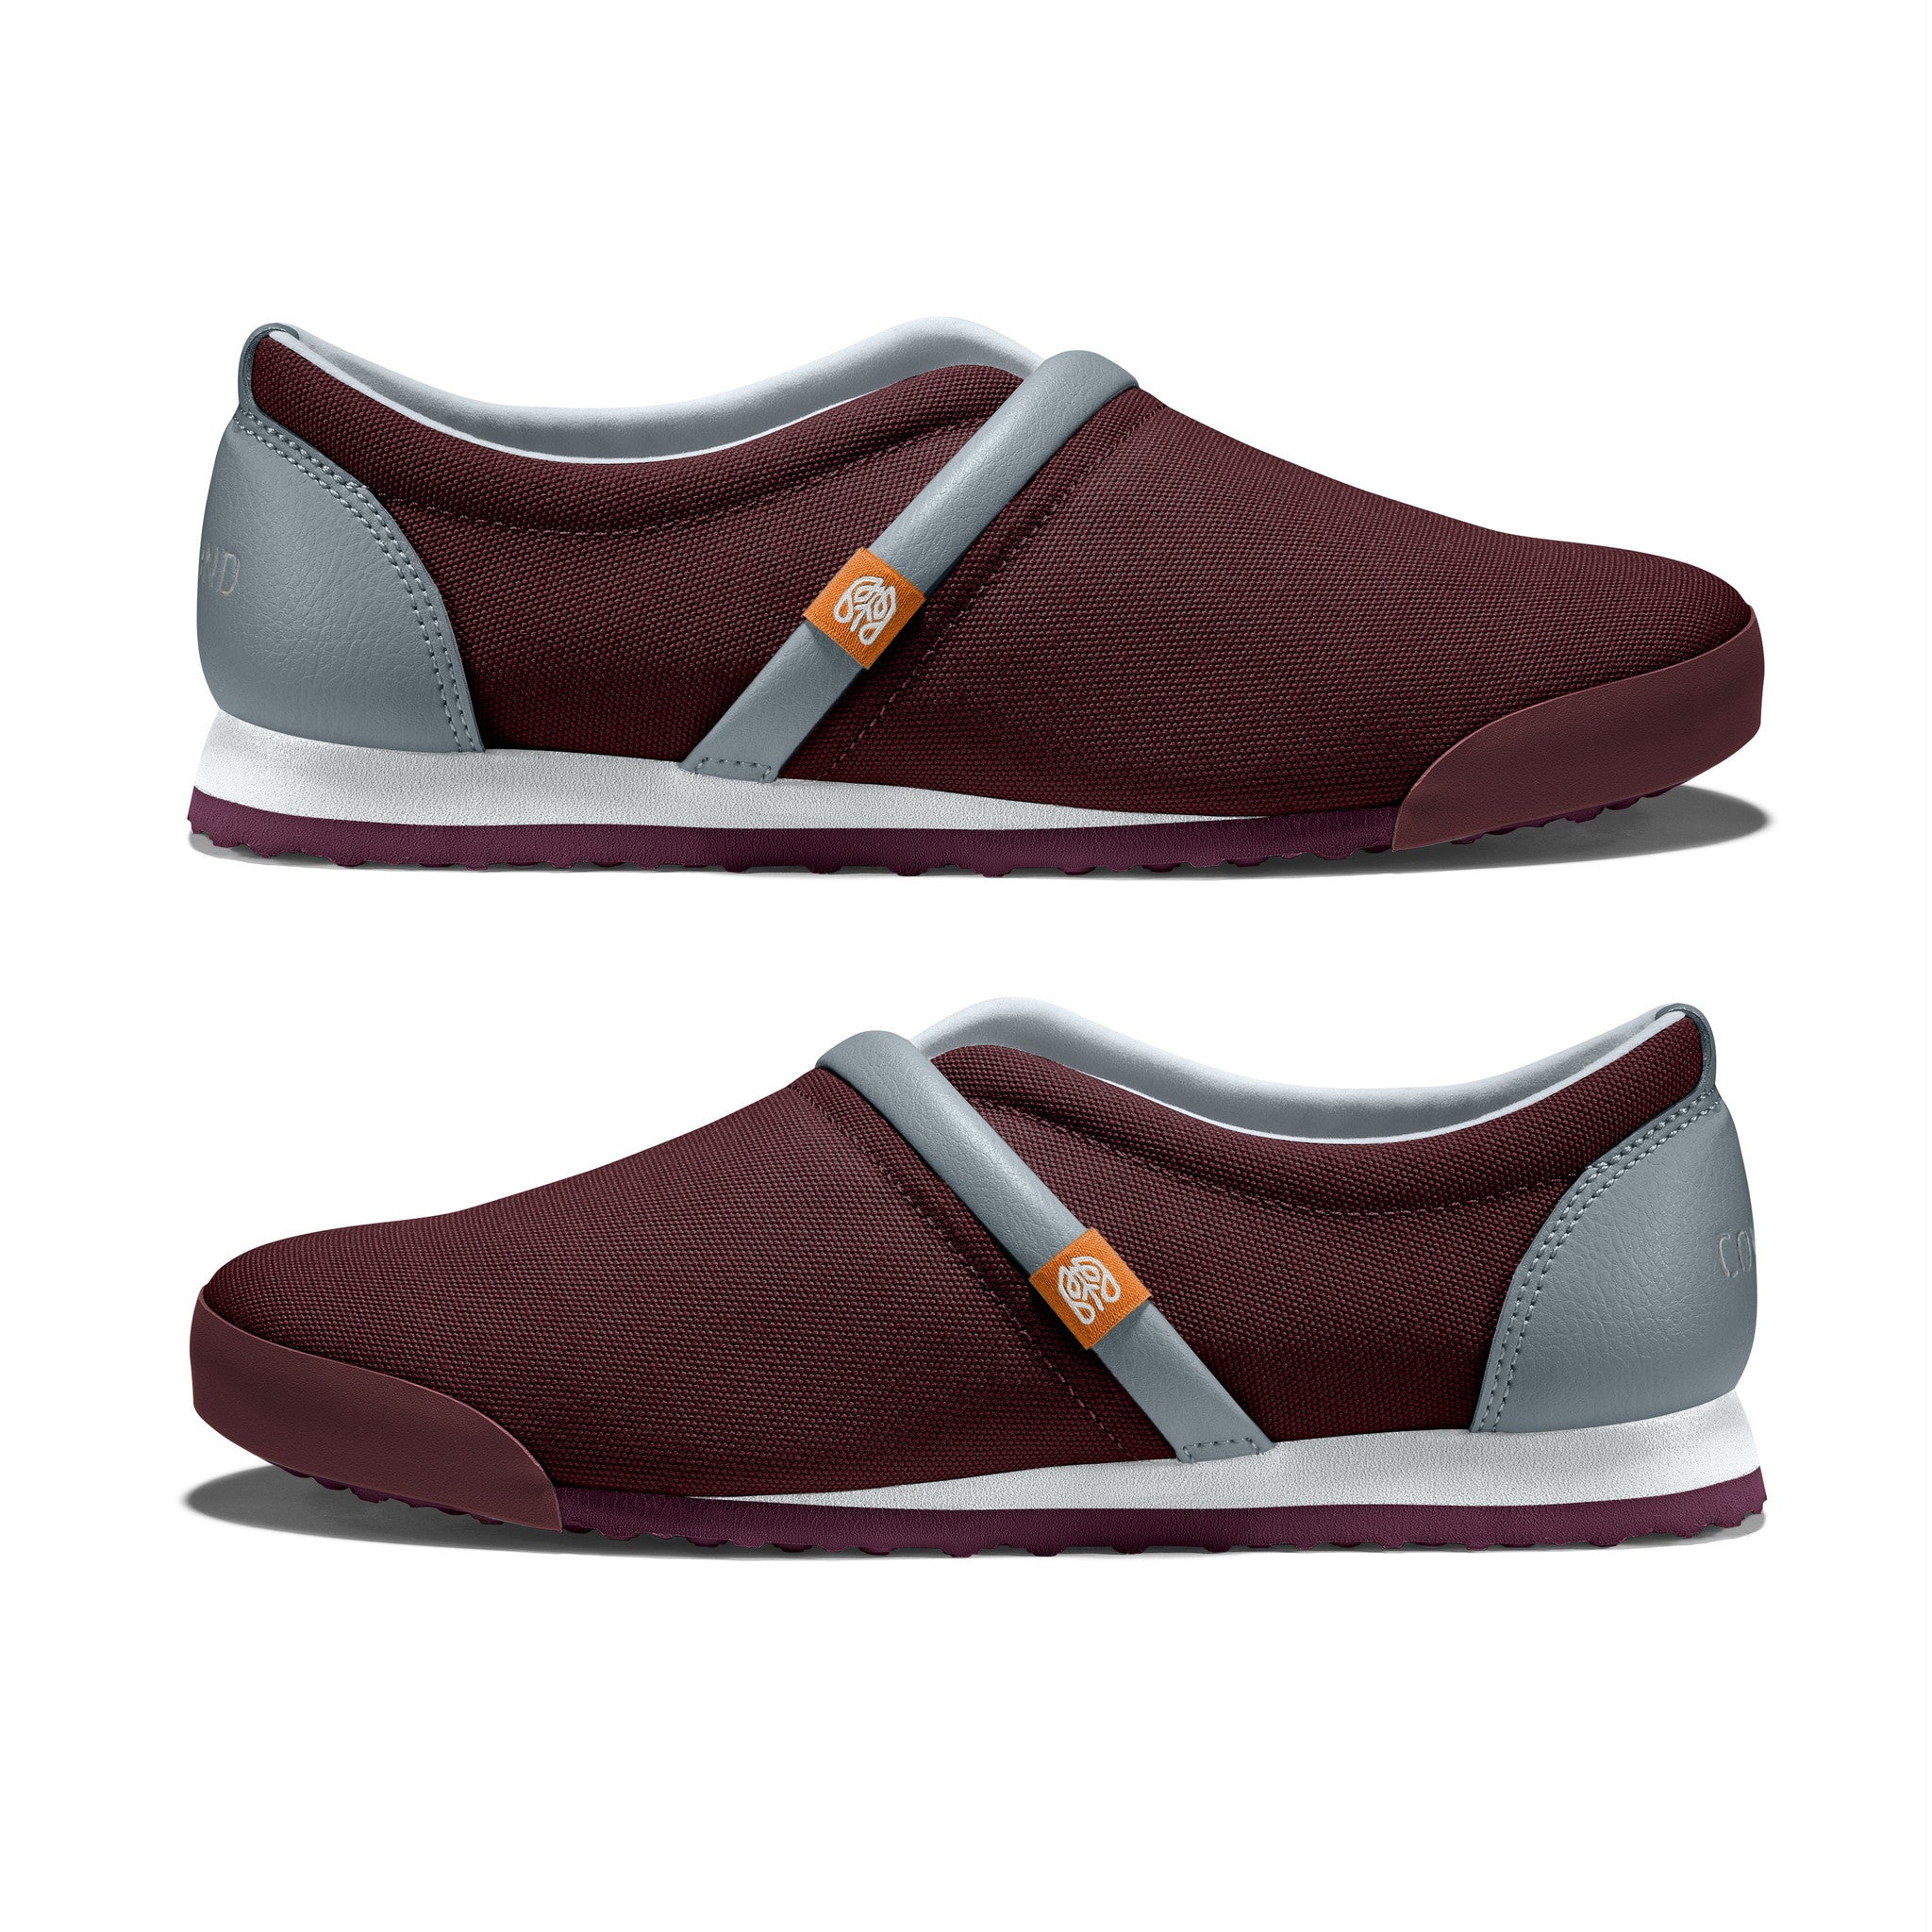 Cabernet - Common Ground Footwear Shoes Side View